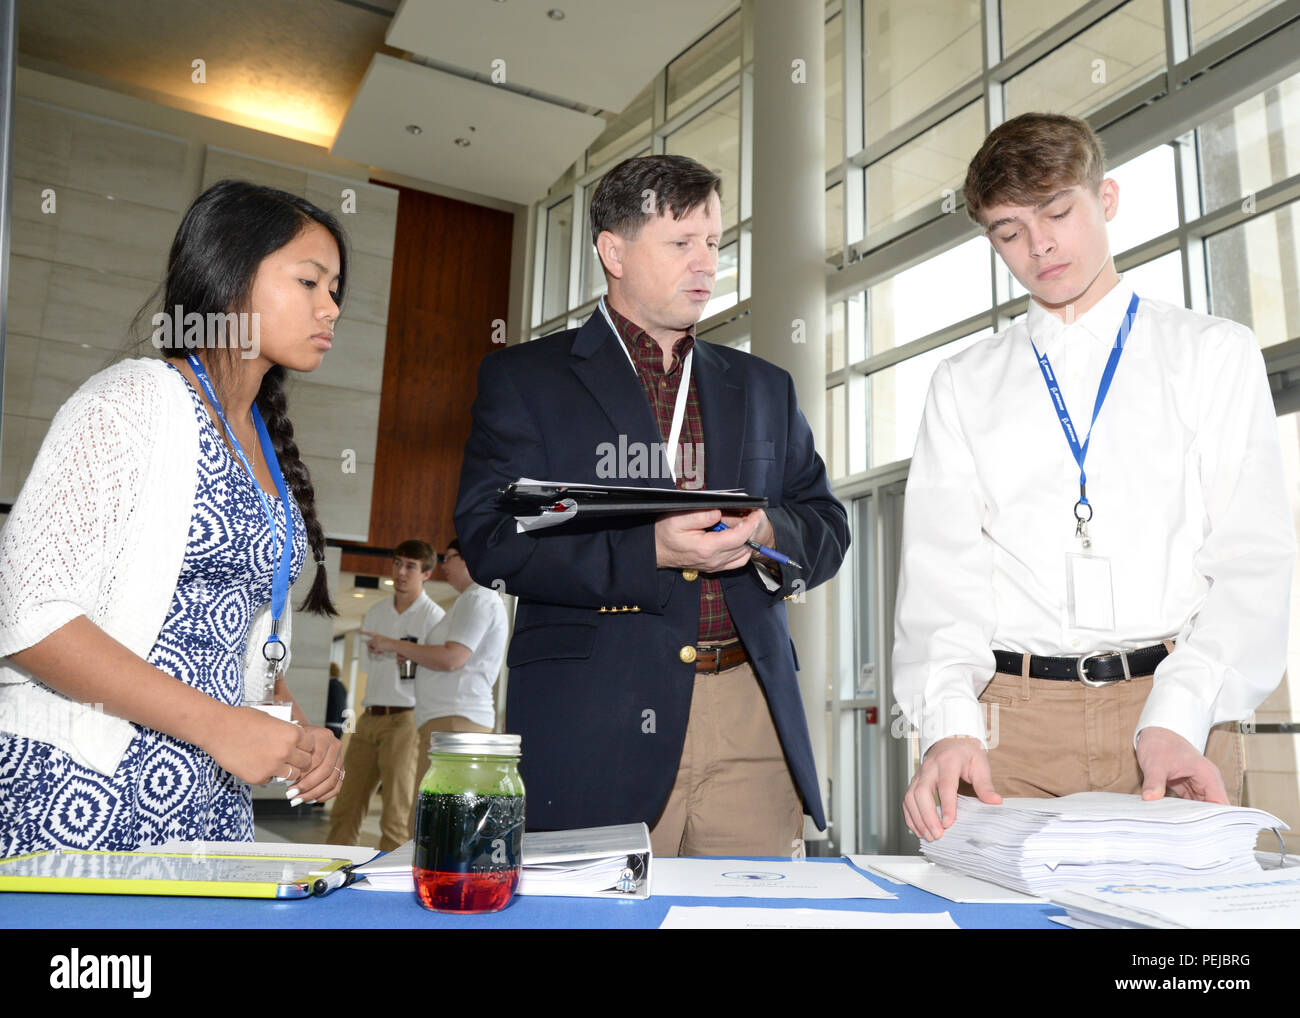 Russ Dunford, U.S. Army Engineering and Support Center, Huntsville chief of operations, speaks to McCoy Floyd, left, and Zachery Amerson, Palmetto Scholars Academy, North Charleston, South Carolina, about their conceptual payload during the InSPIRESS event at UA Huntsville, Dec. 11. Stock Photo